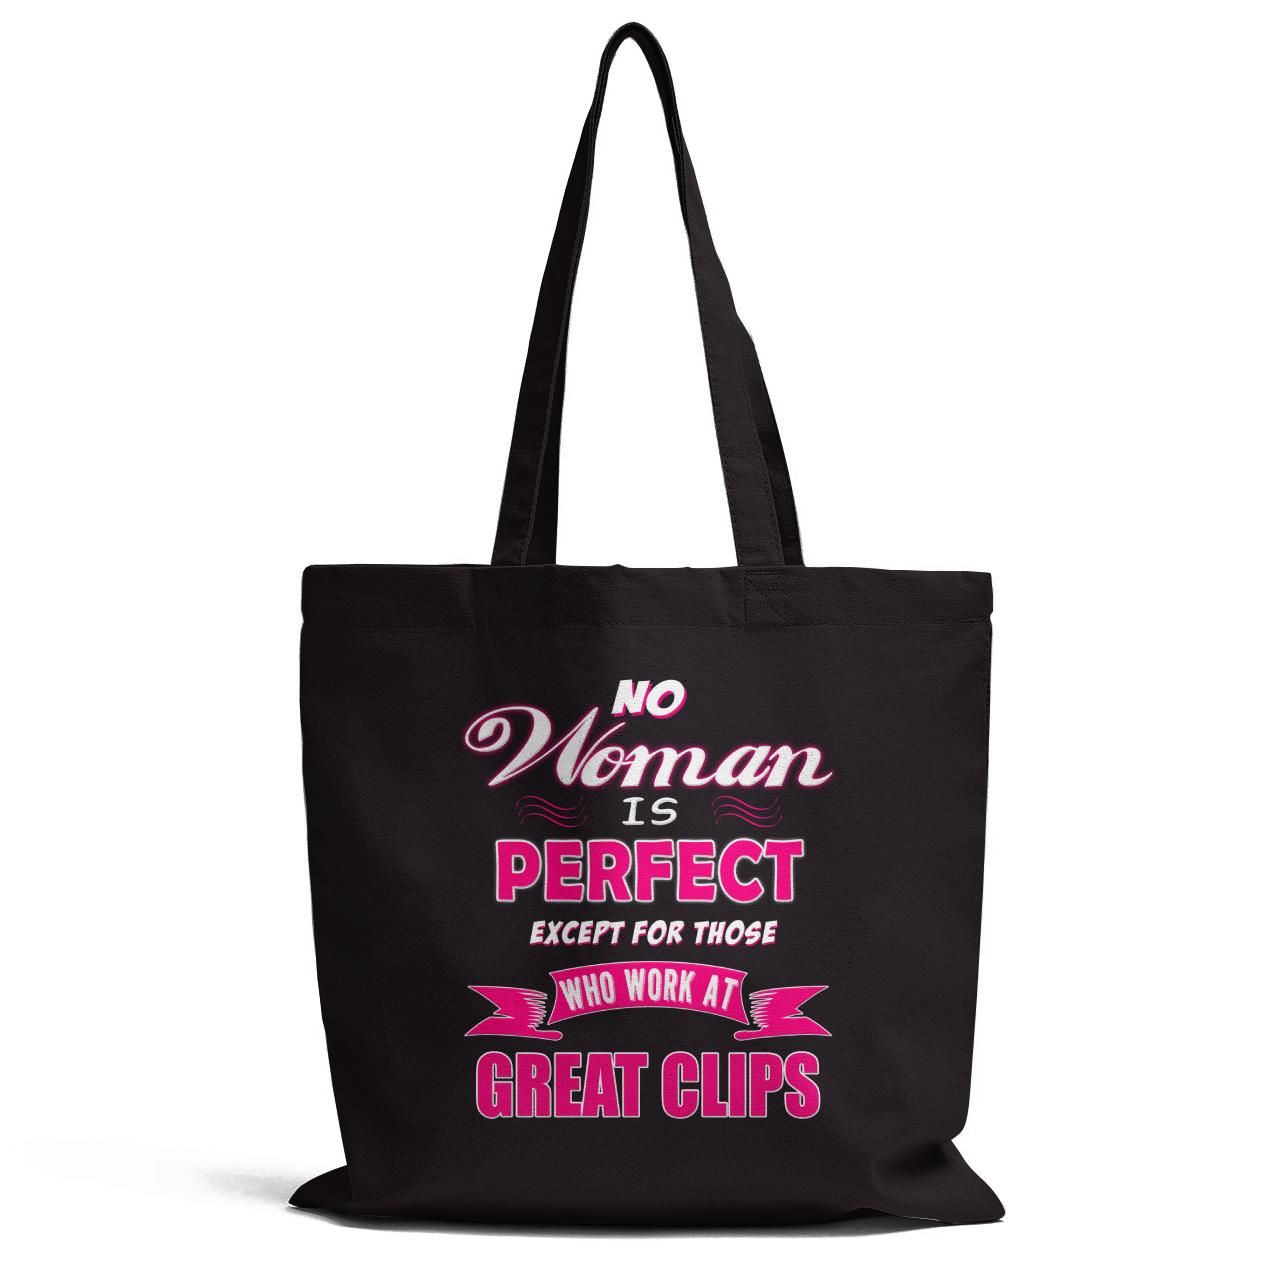 No Woman Is Perfect Except For Those Who Work At Grat Slips Tote Bag